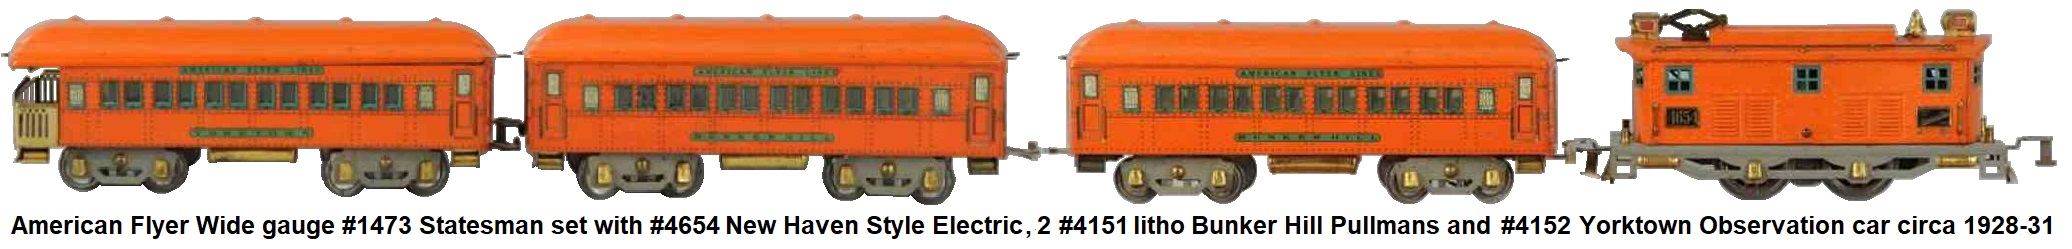 American Flyer Wide gauge #1473 Statesman Passenger Set with #4654 New Haven style electric outline loco, two 14 inch #4151 Bunker Hill Orange Lithographed Pullmans and #4152 Yorktown Observation car circa 1928-31